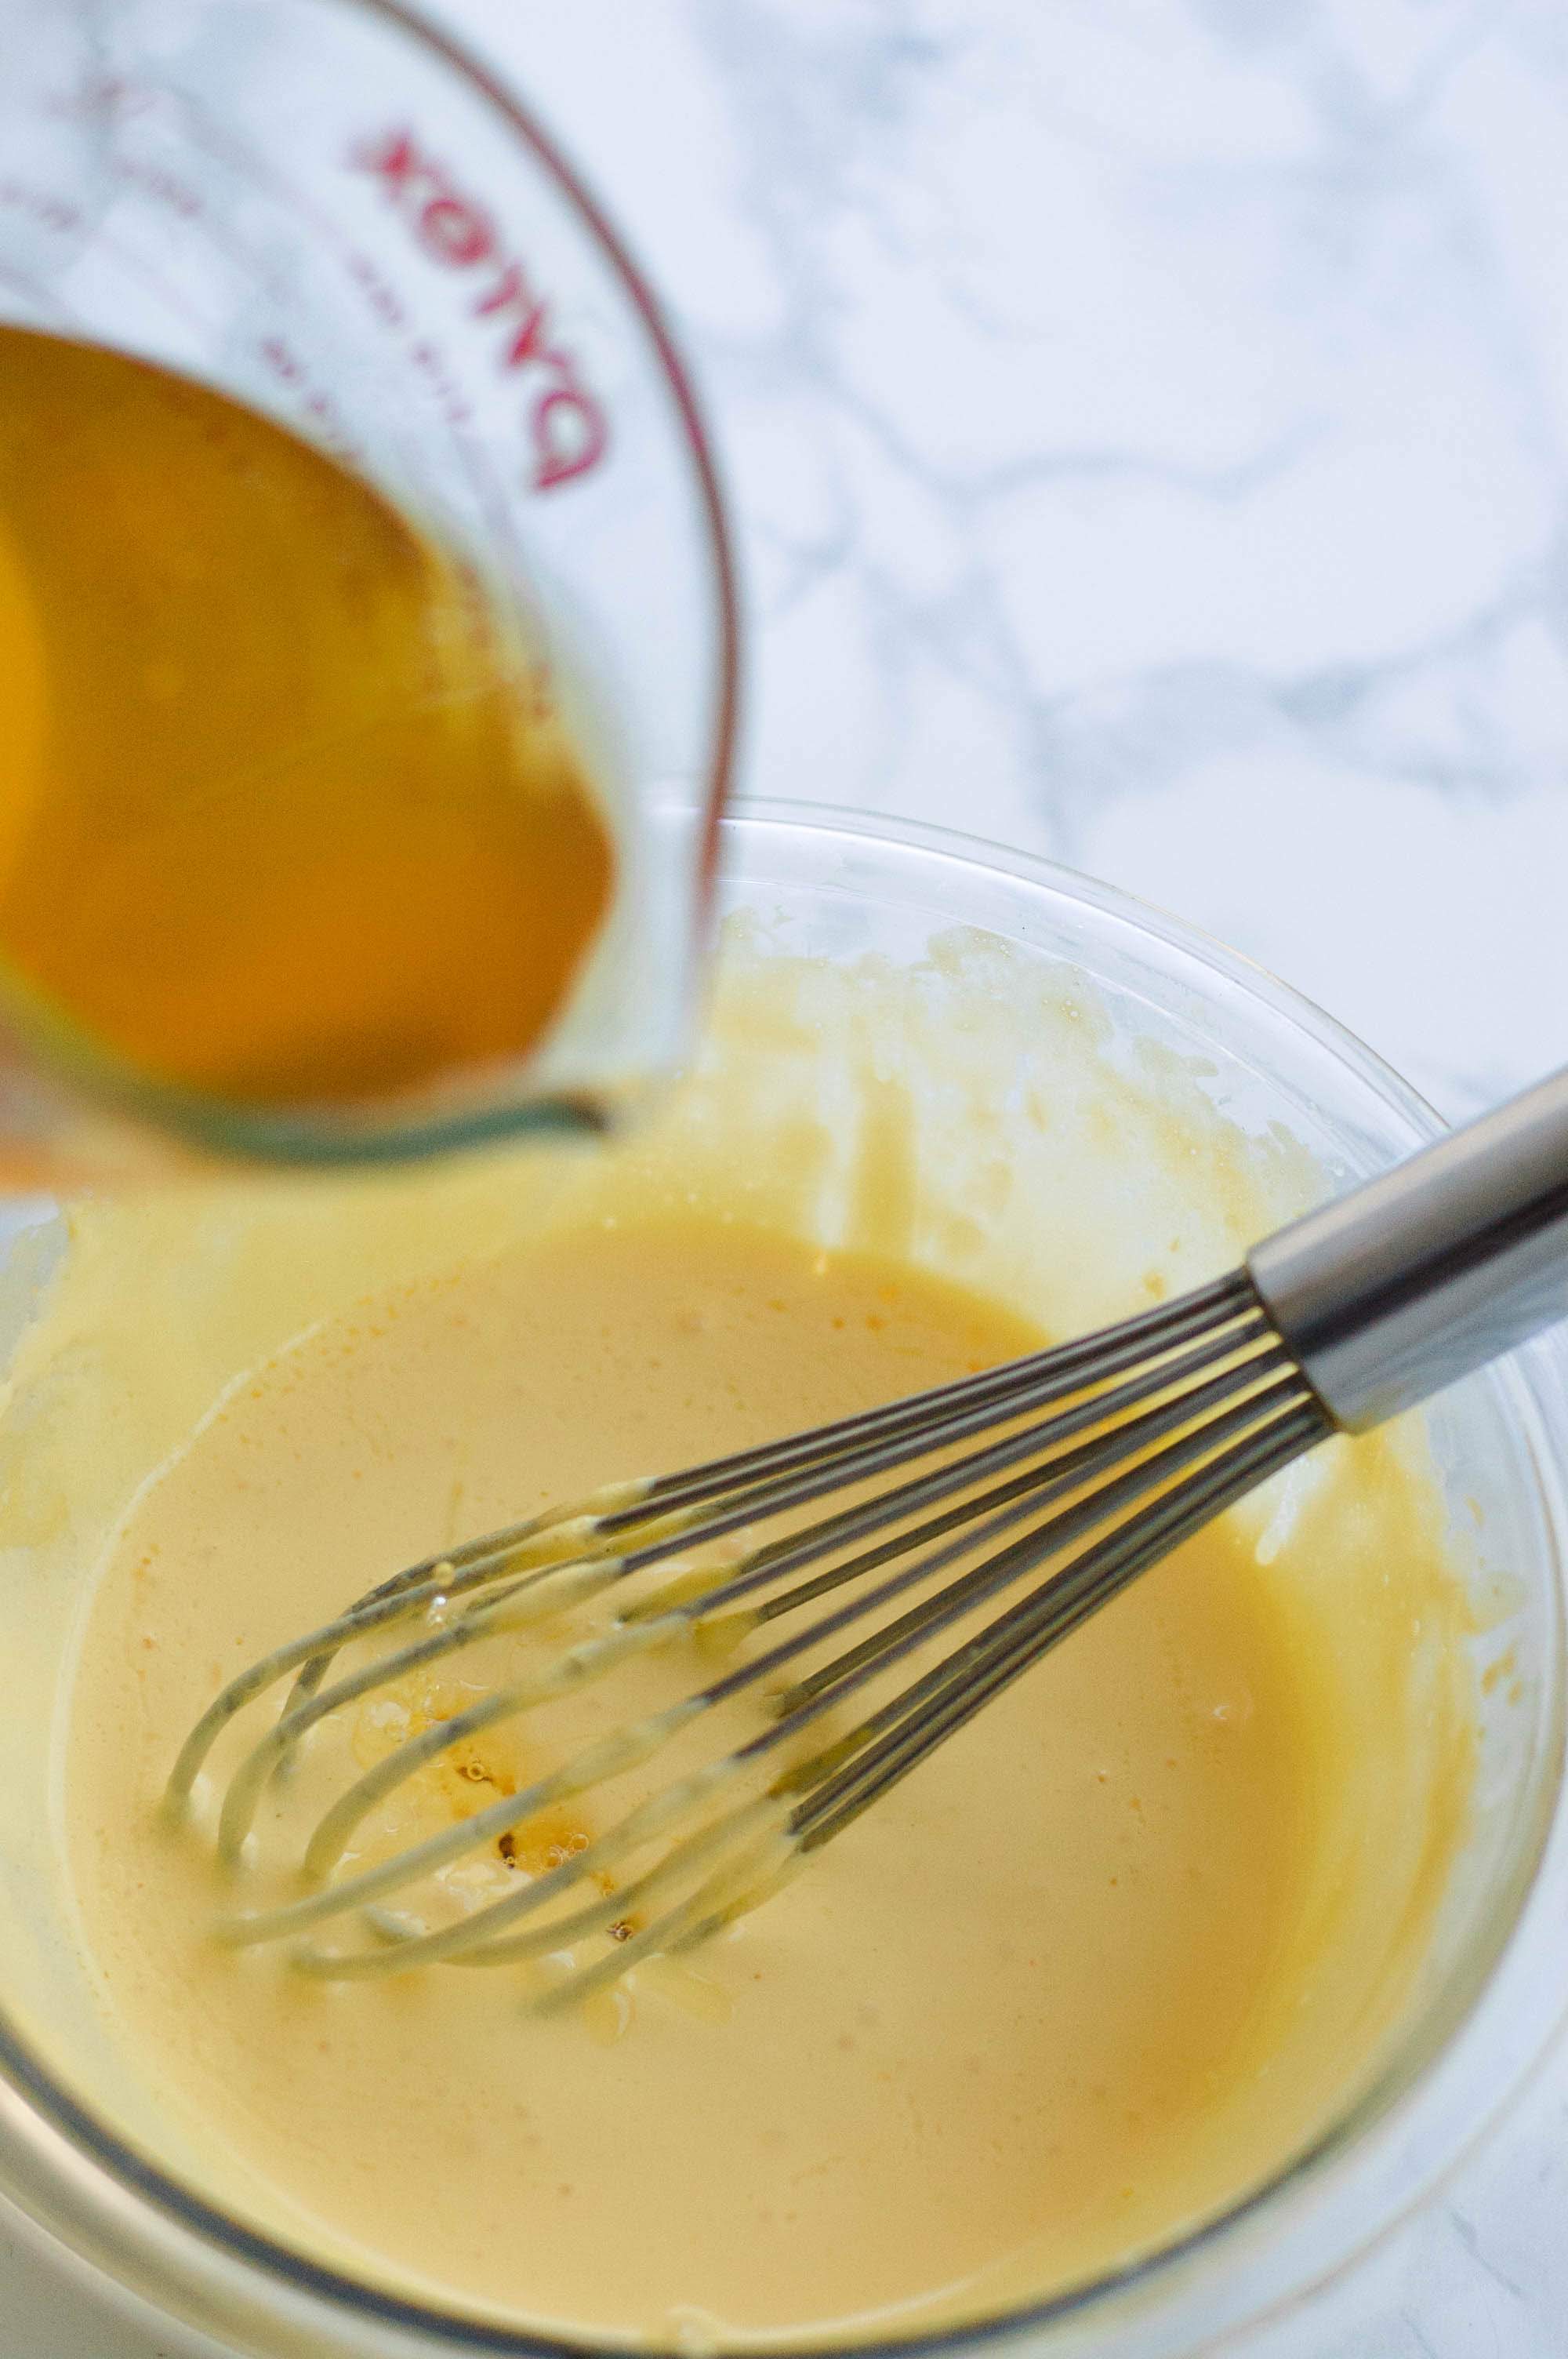 A measuring cup of clarified butter beings poured into a glass bowl of hollandaise sauce with a whisk in it.